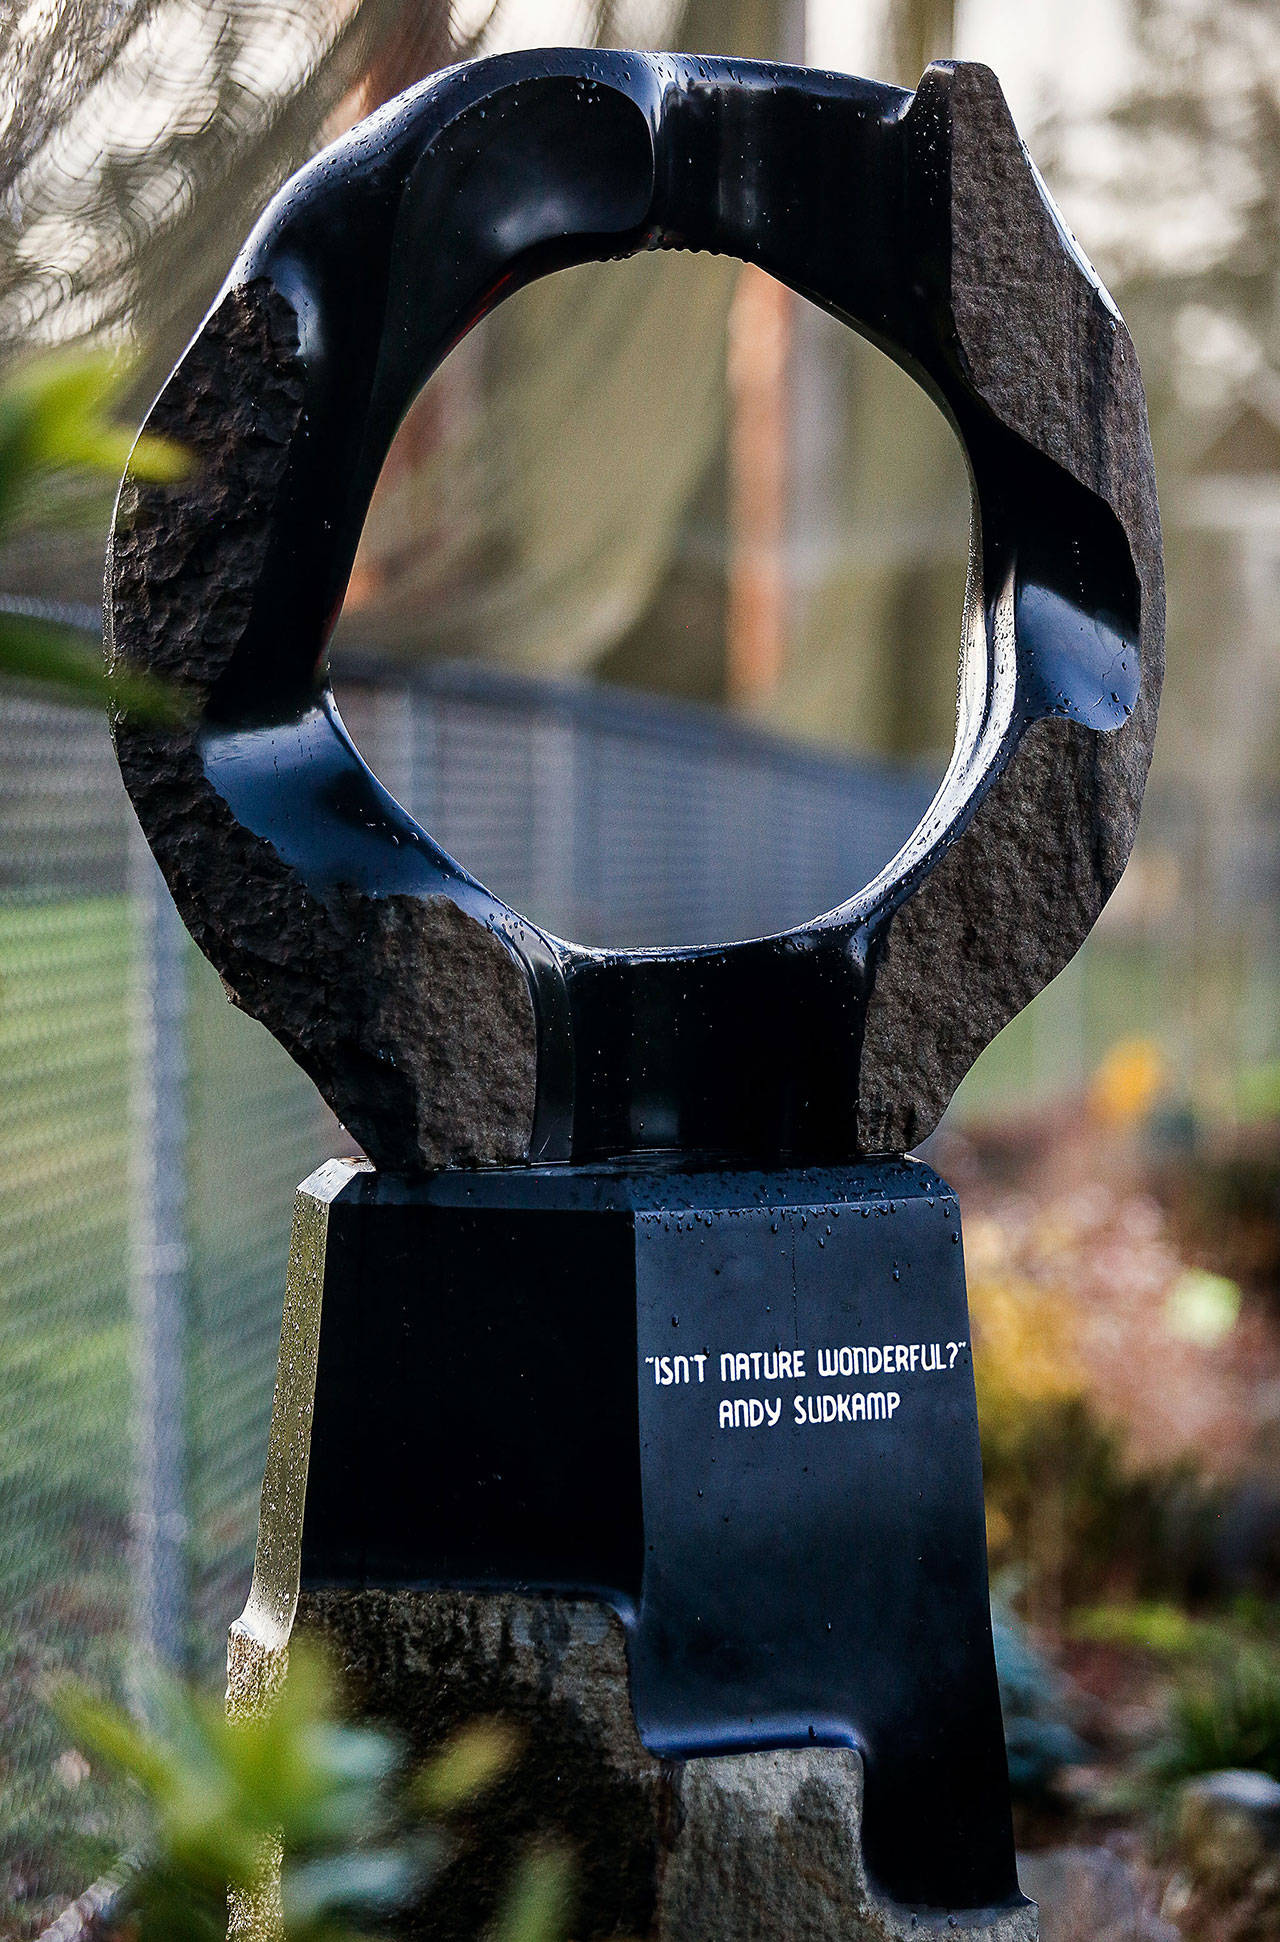 “Equatorial Equinox #5,” a sculpture at Evergreen Arboretum & Gardens, was installed in honor of Andy Sudkamp, an Everett High School teacher who died in 2015. The nonprofit arboretum group raised money to buy the artwork, which it is donating to the city of Everett. (Dan Bates / The Herald)